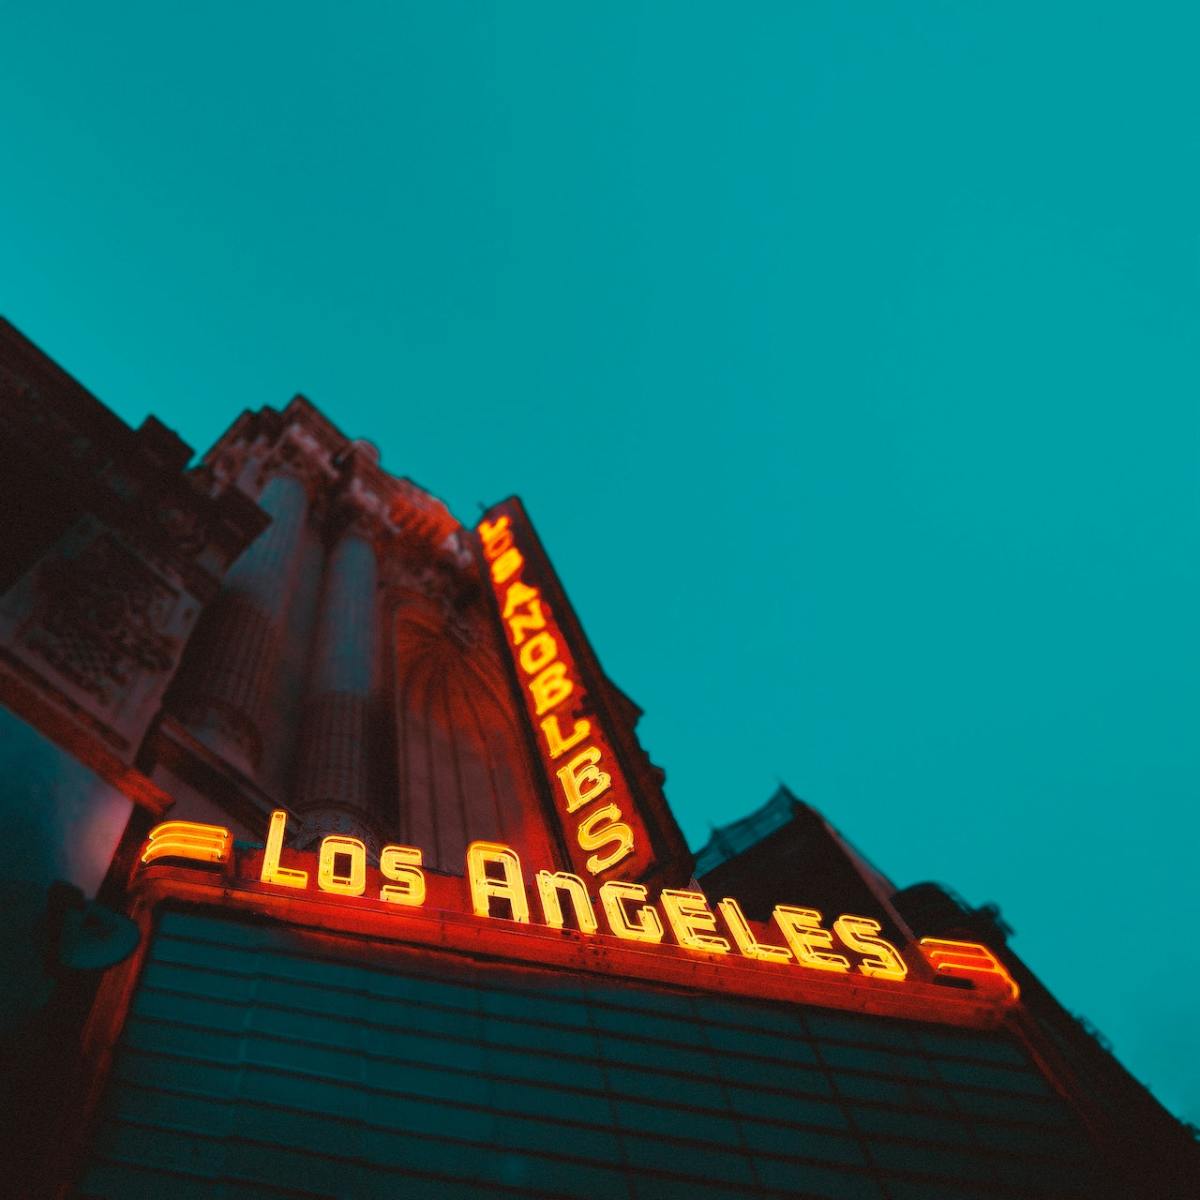 Take a Family Vacation to Los Angeles